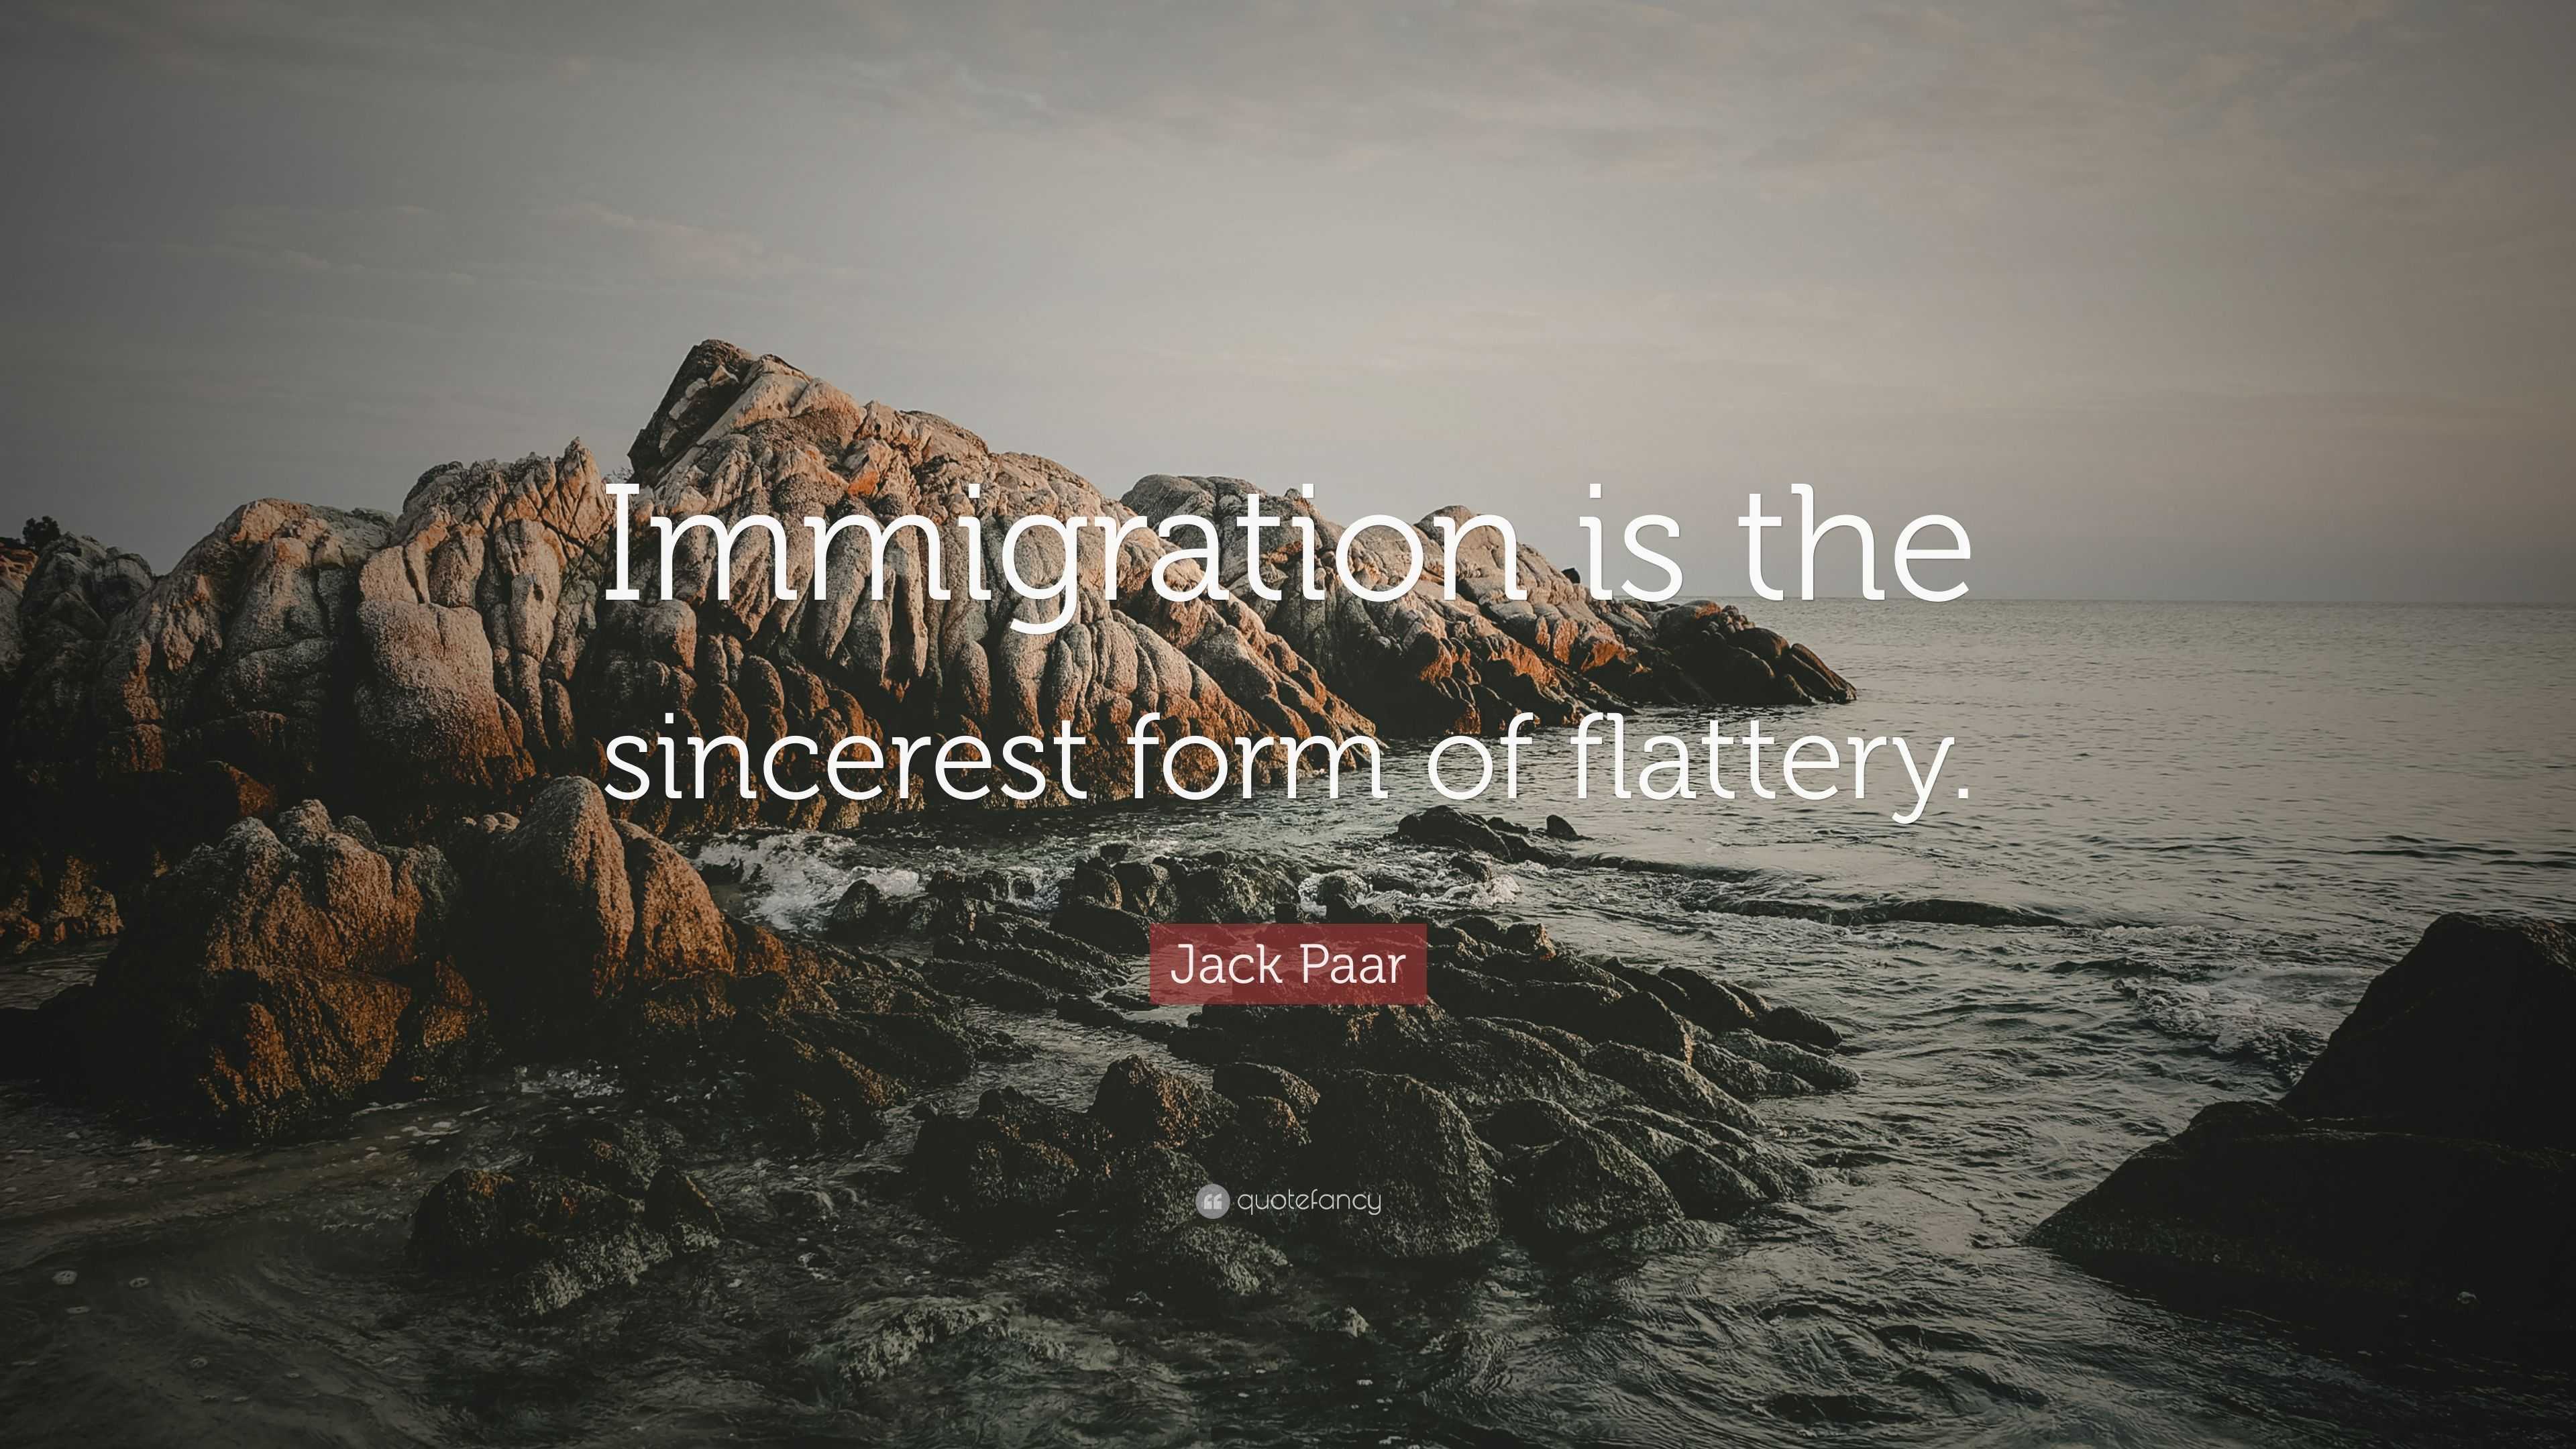 Jack Paar Quote: “Immigration is the sincerest form of flattery.”